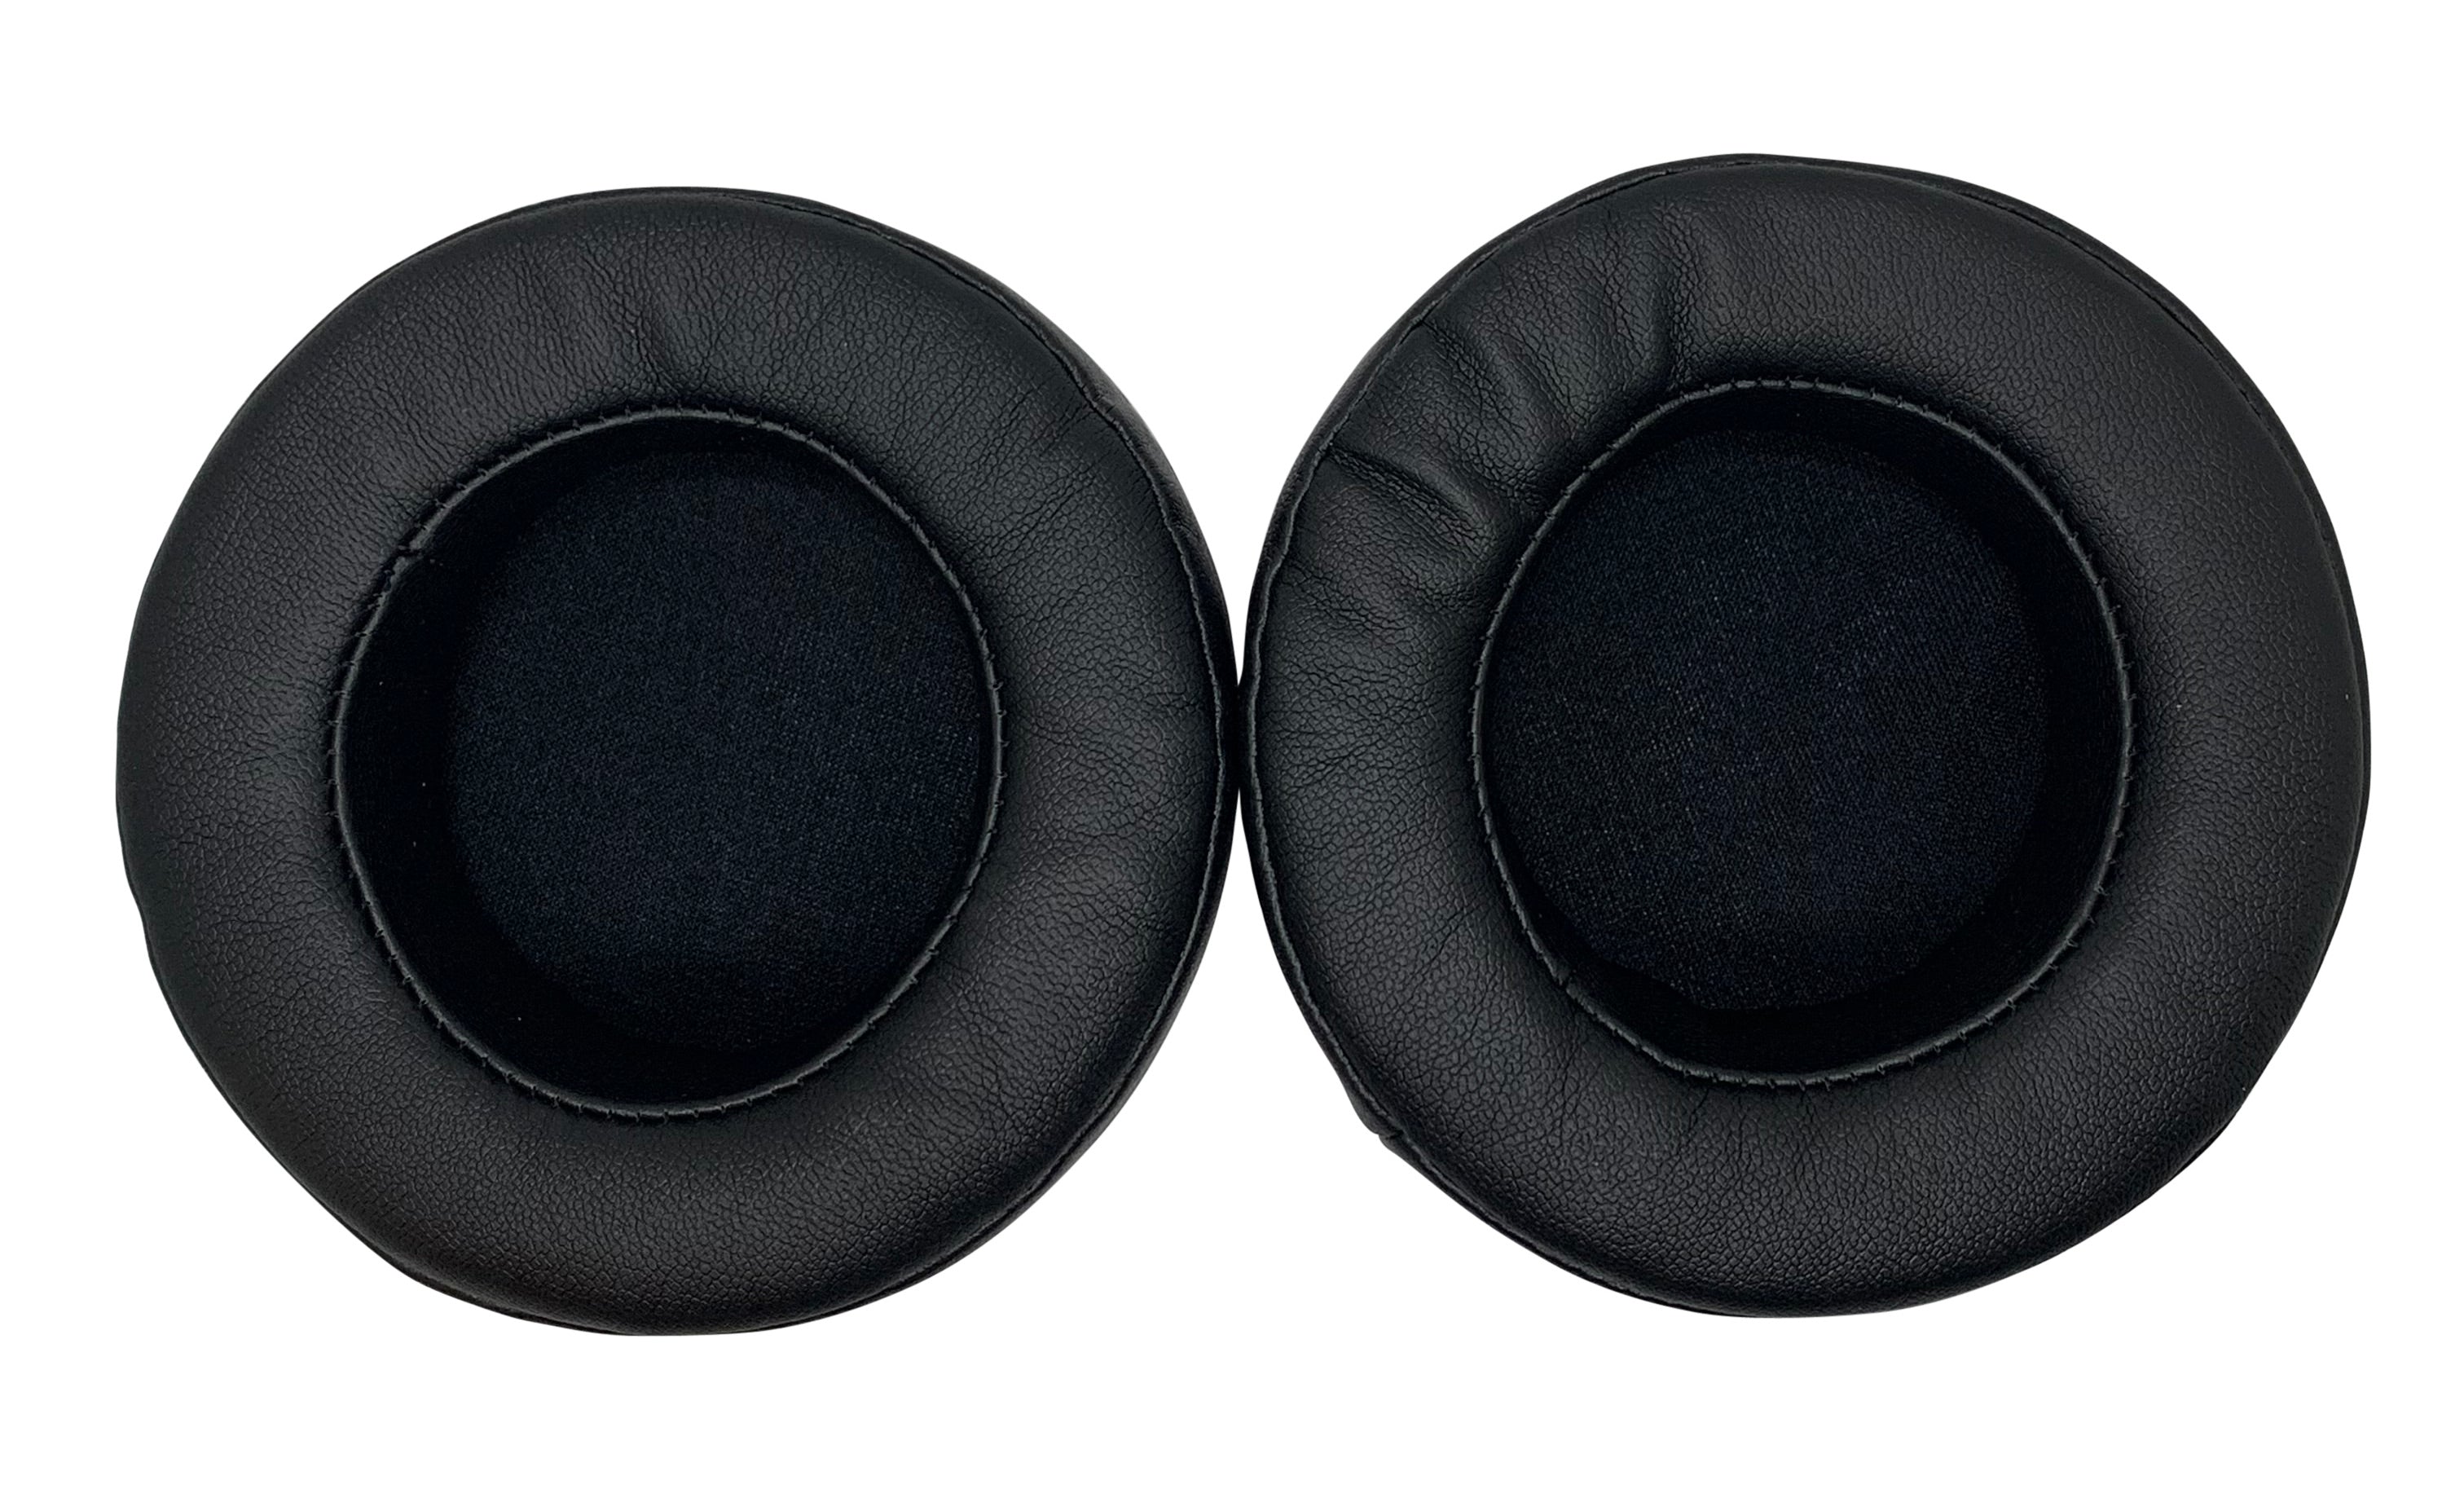 CentralSound Premium Replacement Ear Pad Cushions Round 100mm Soft Protein Leather Memory Foam - CentralSound